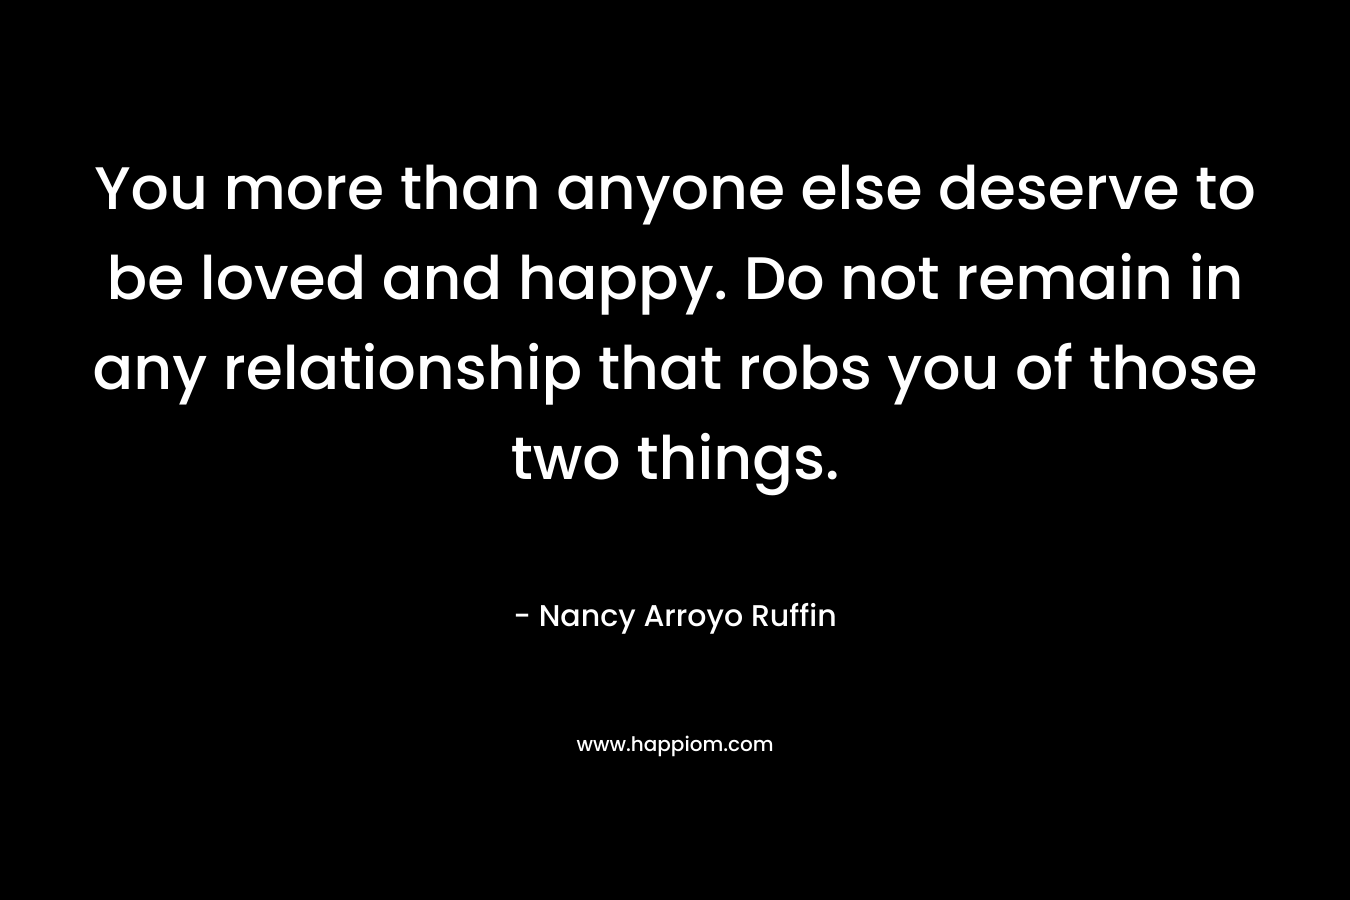 You more than anyone else deserve to be loved and happy. Do not remain in any relationship that robs you of those two things. – Nancy Arroyo Ruffin